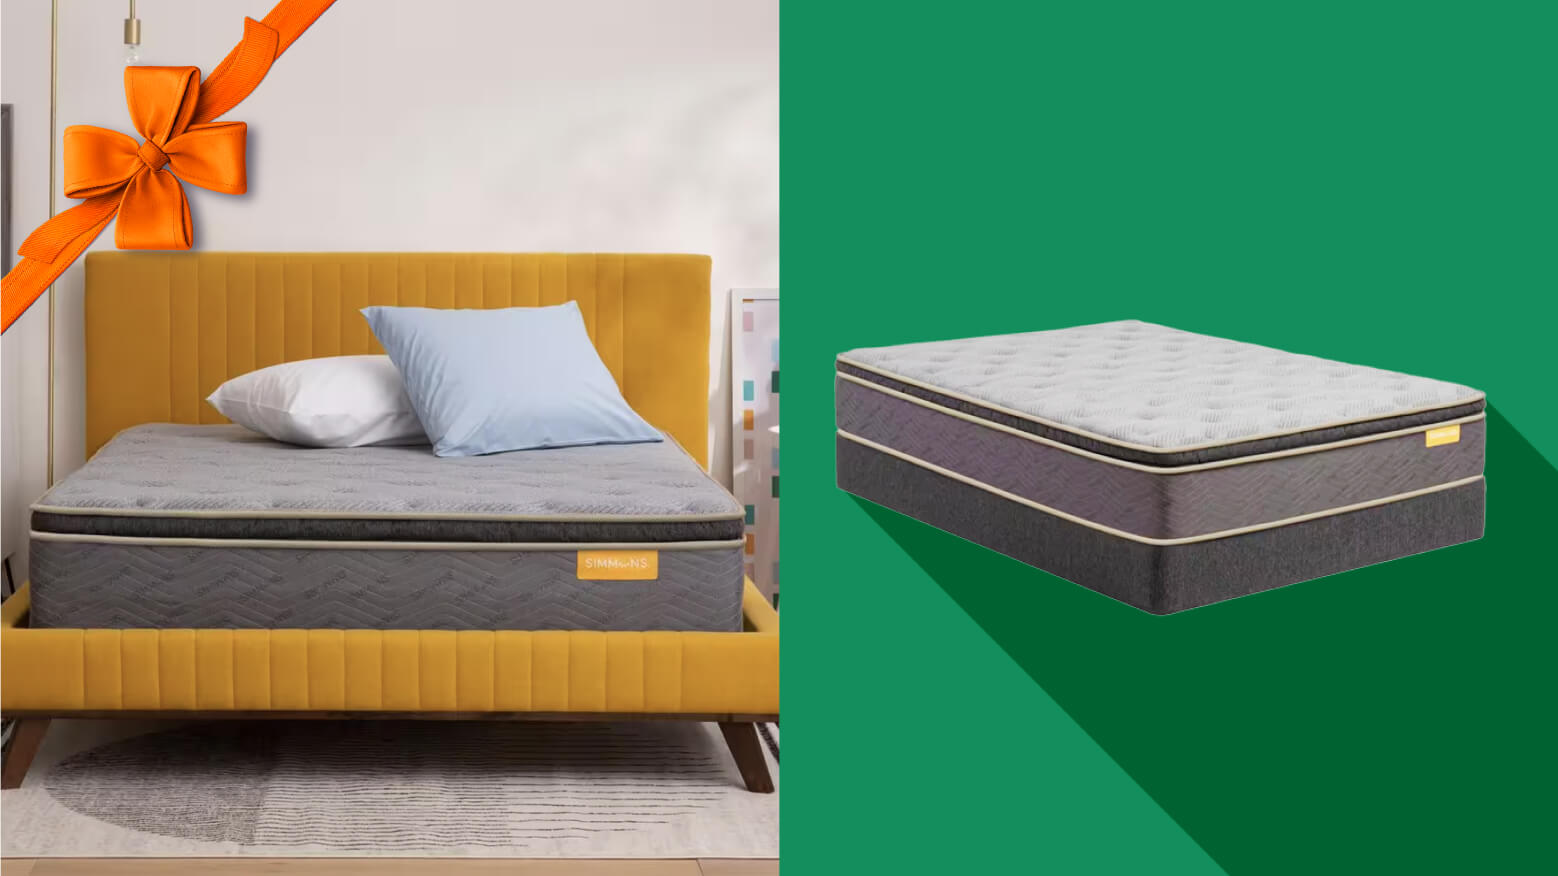 Turn Your Queen Sized Mattress Into a King Sized Bed!